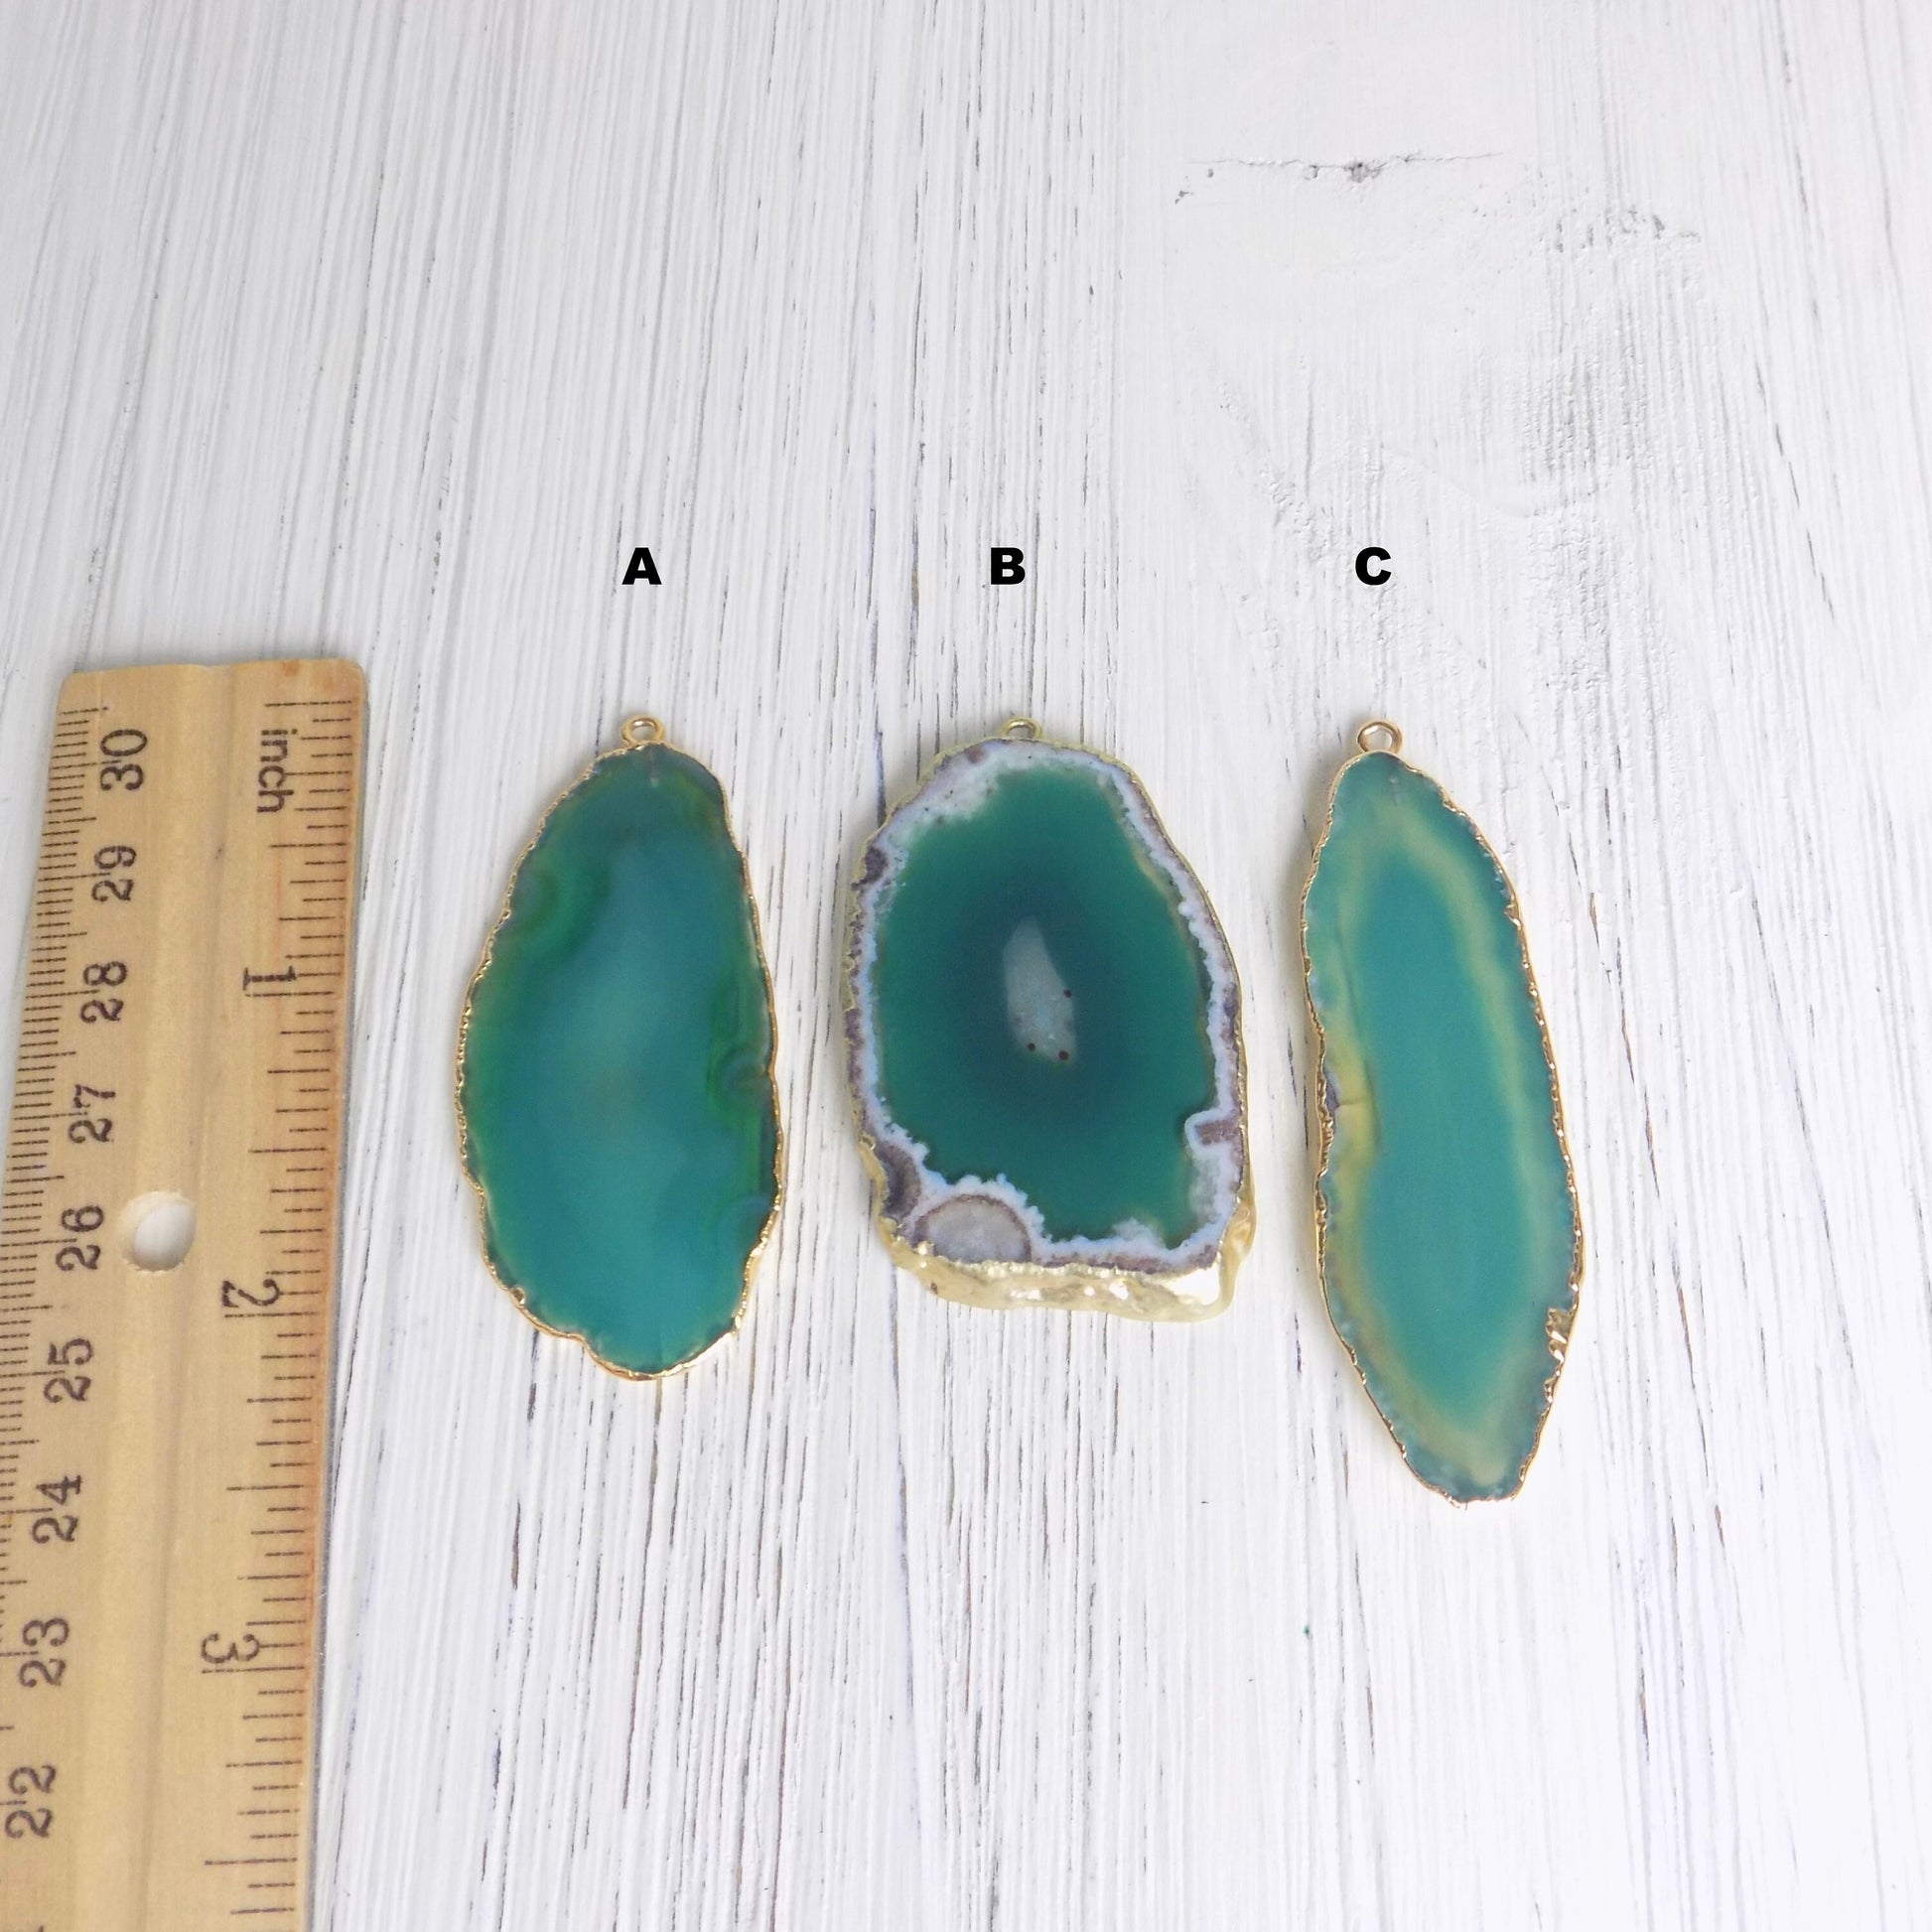 Agate Necklace, Green Agate, Slice Agate Pendant, Sliced Agate, Geode Necklace, Gold Layering, Boho, Unique Mothers Day Gift Women G13-256